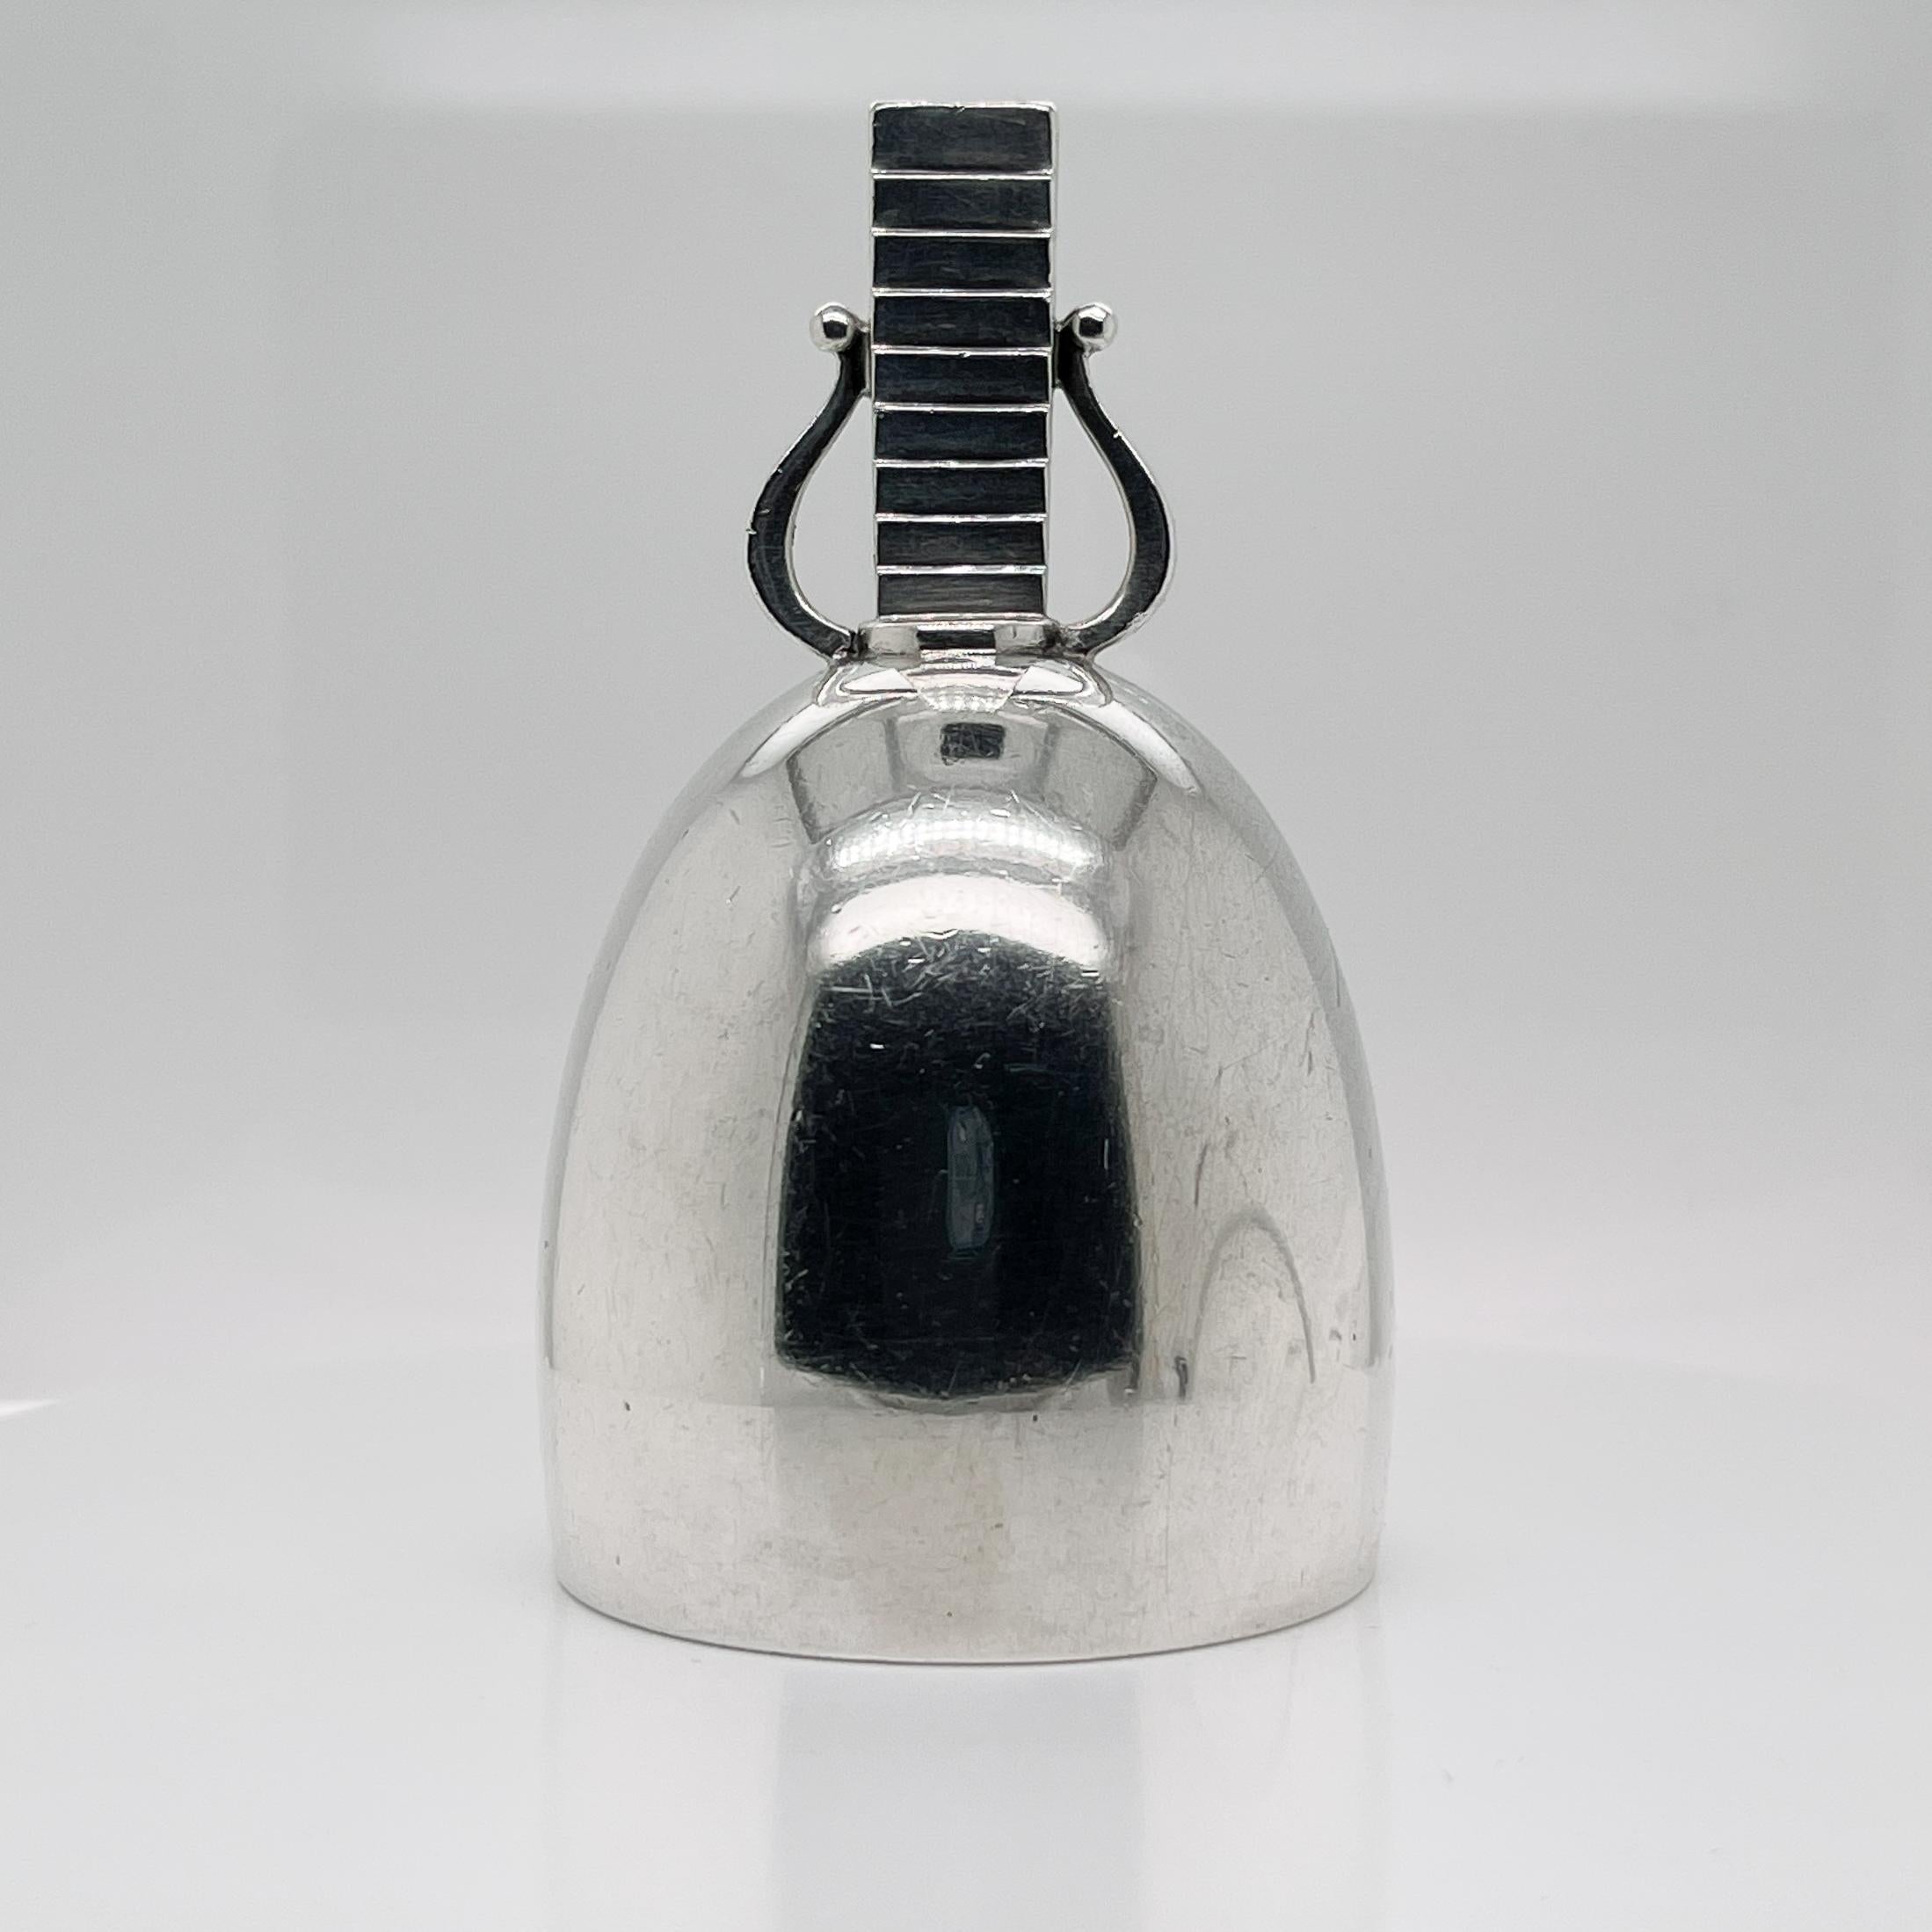 A very fine Georg Jensen sterling silver table bell.

Made to match the Parallel flatware pattern from 1931.

Model #247

Designed by Oscar Gundlach-Pedersen. 

Simply a wonderful Georg Jensen bell!

Date:
1930s

Overall Condition:
It is in overall